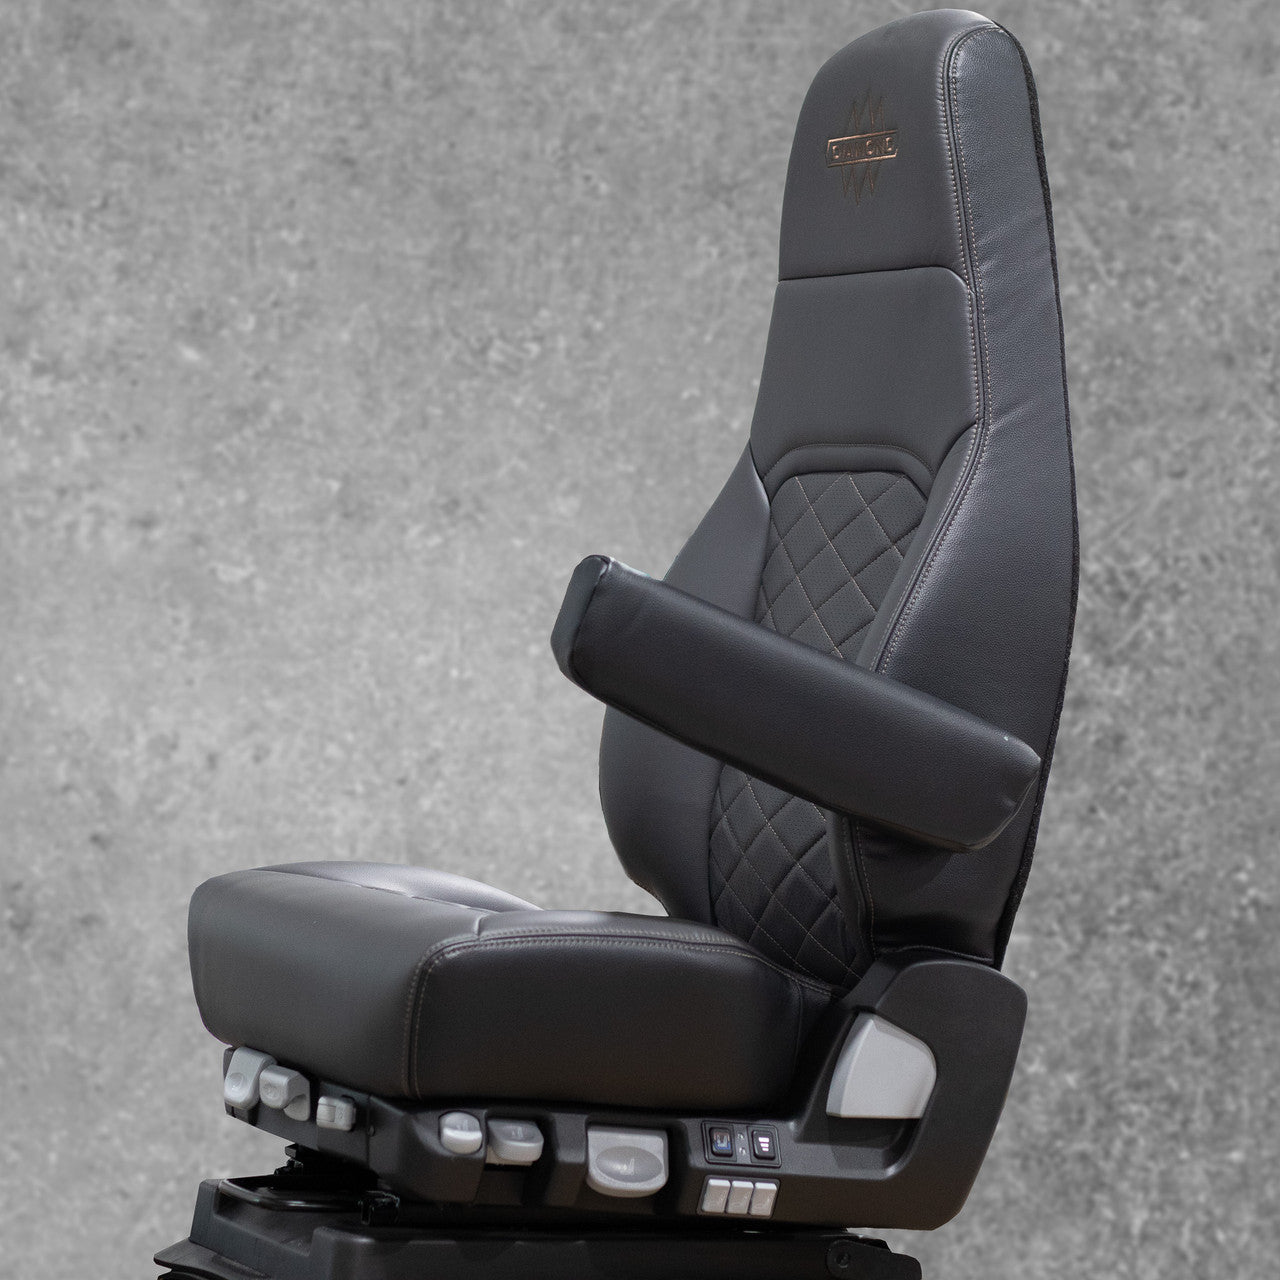 ISRI seat without the seat cover